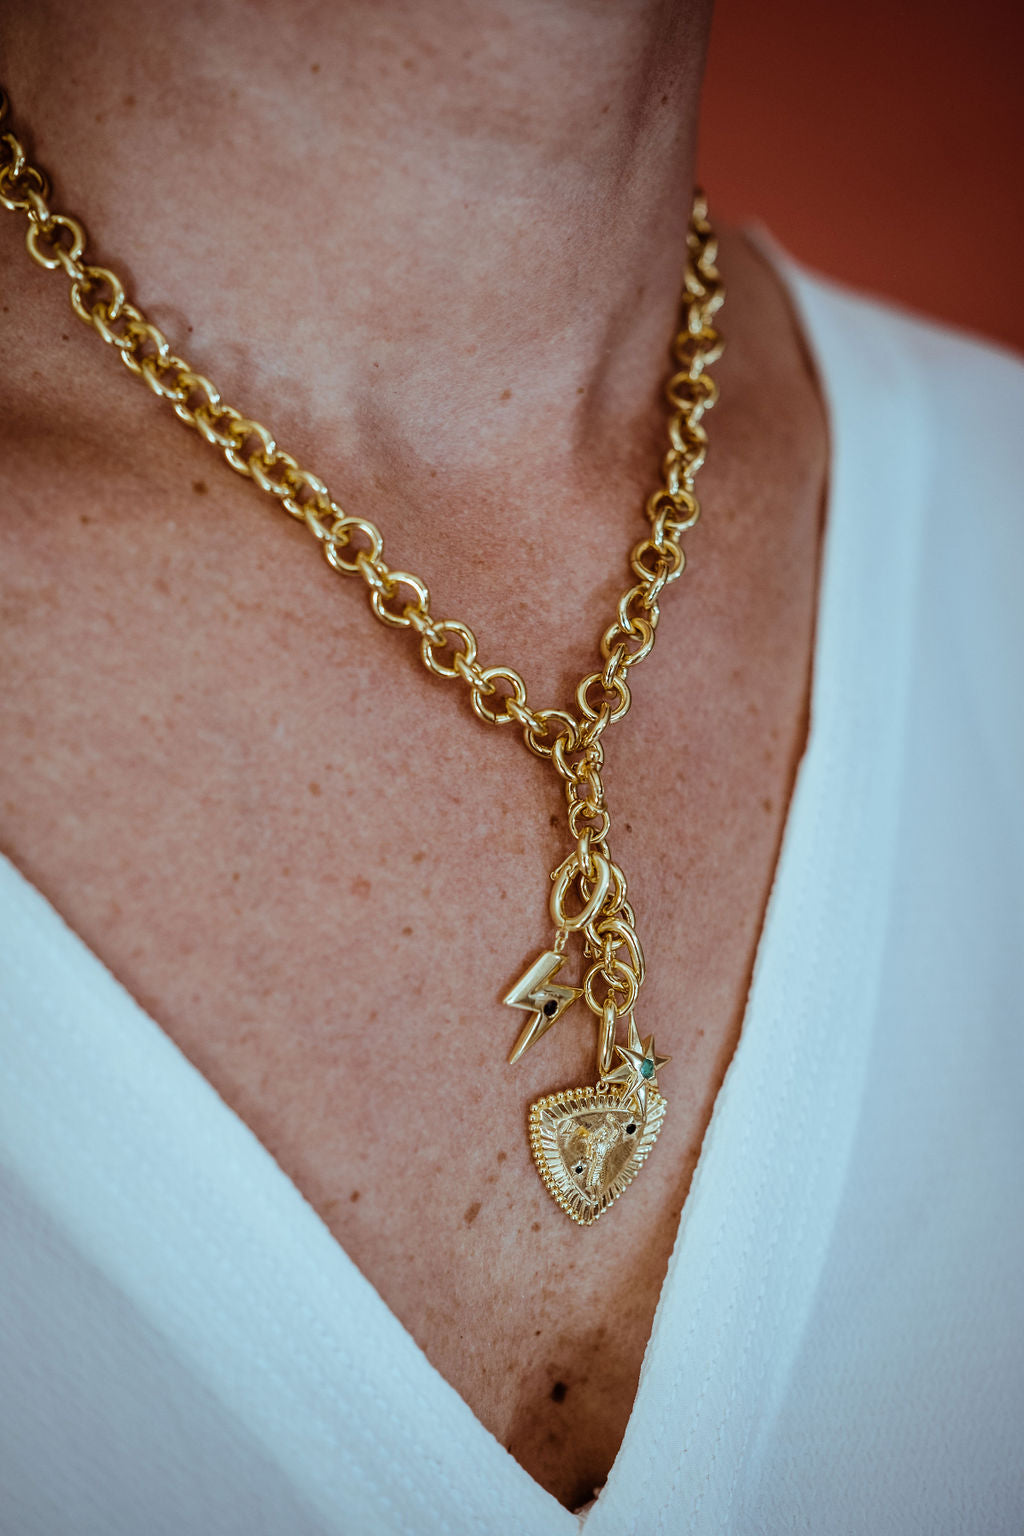 No Rules Chain Necklace in 18ct Gold Plated